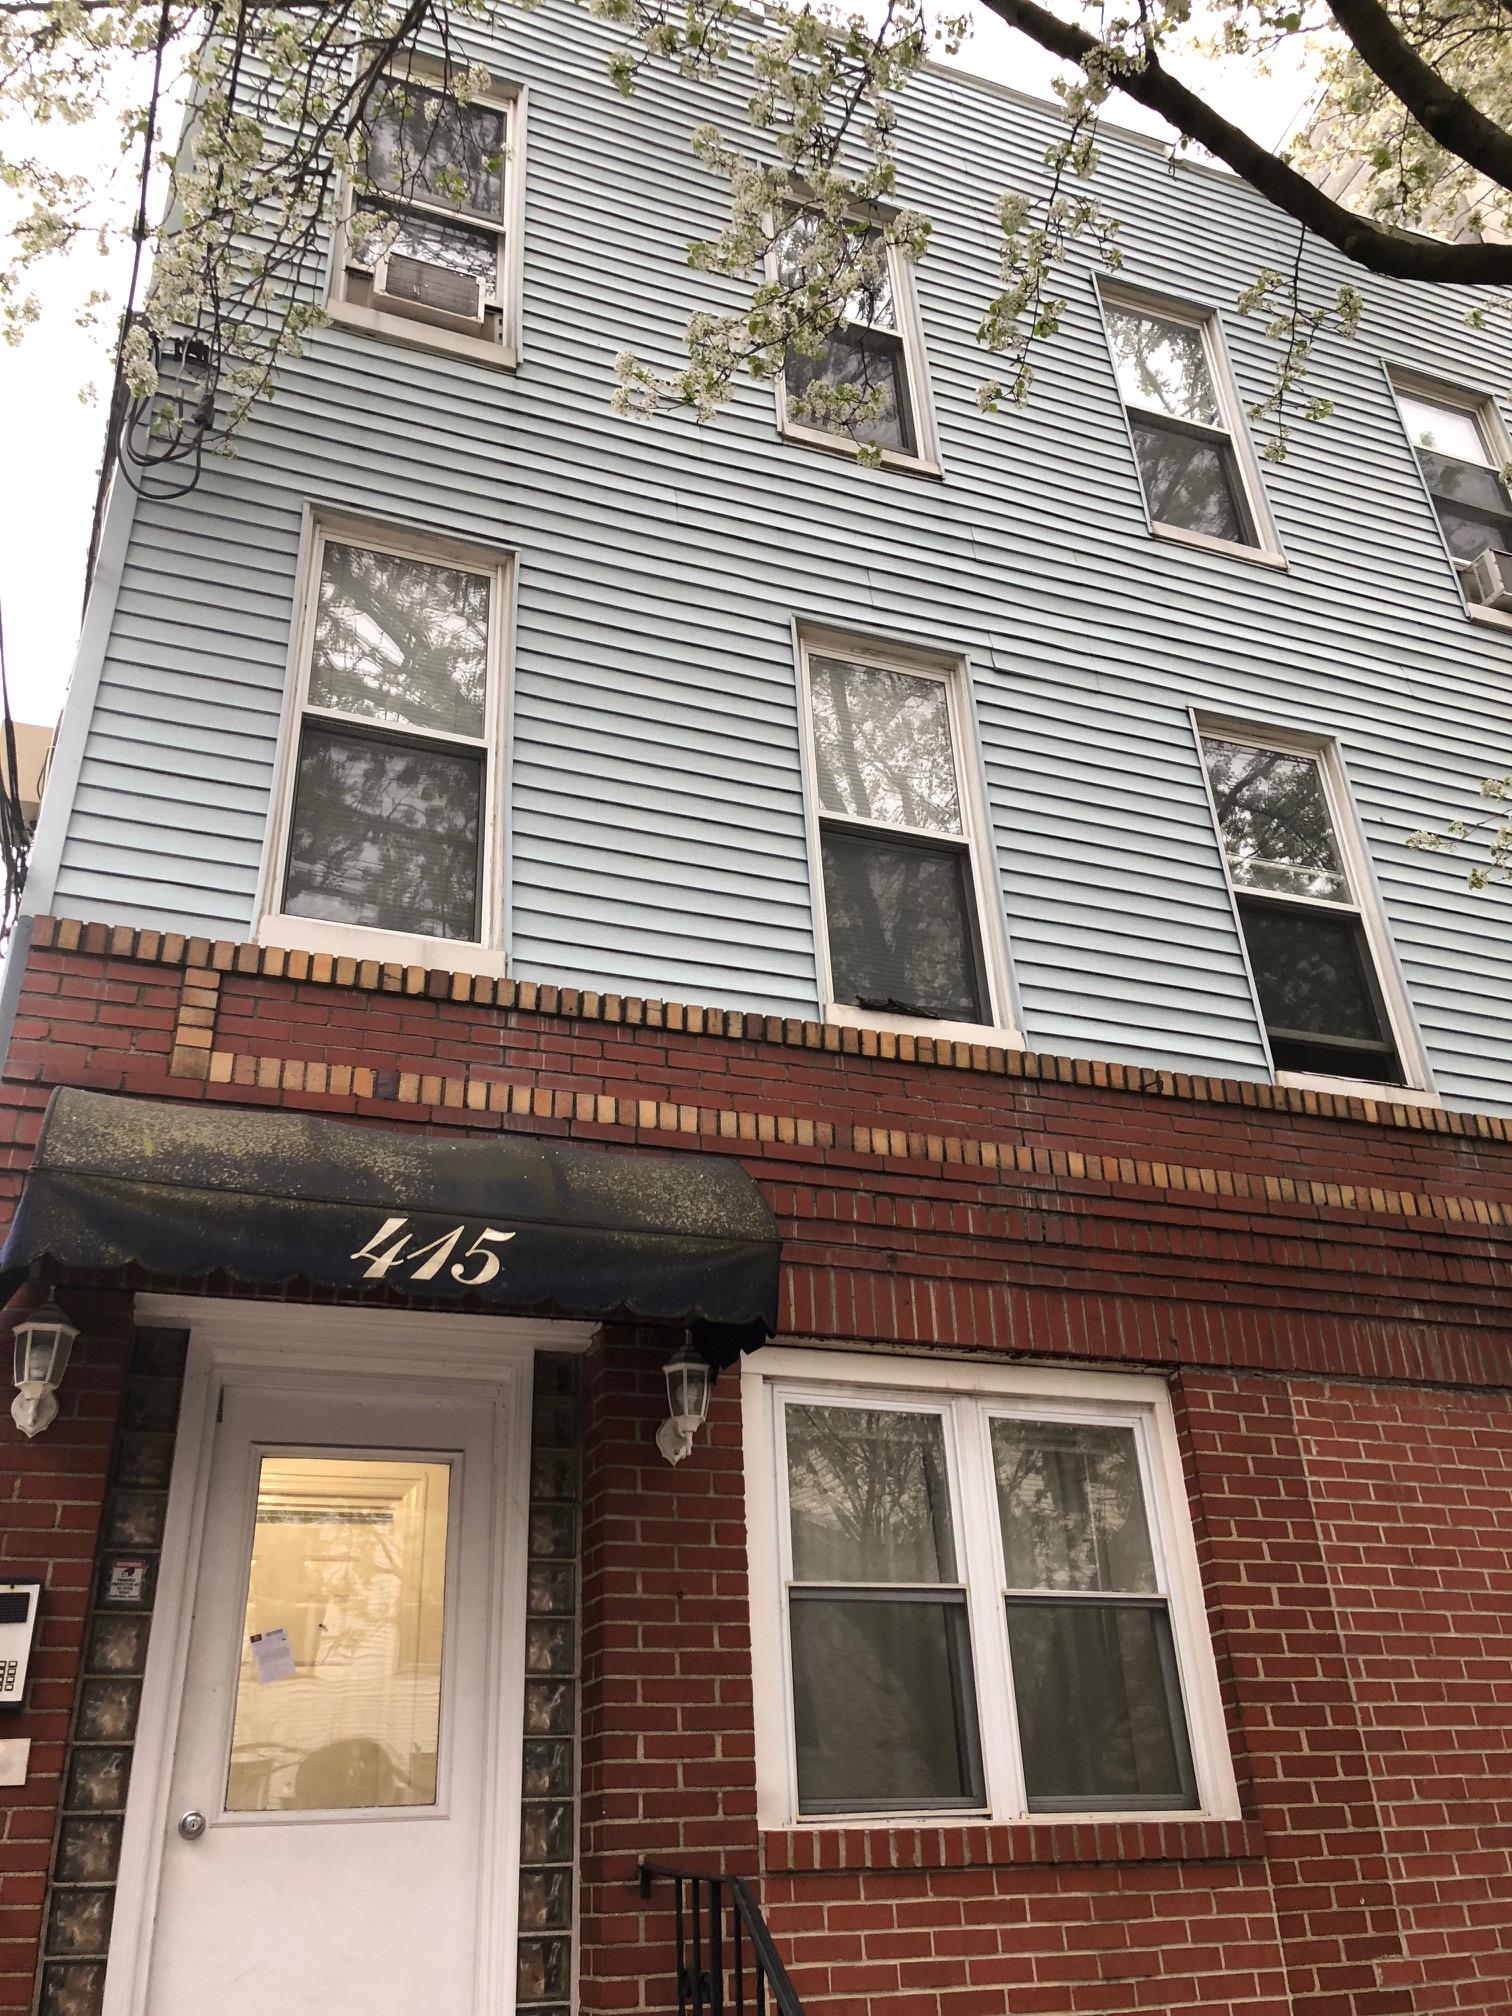 NO BROKER FEE. Great deal two bedroom one bath with two great size bedrooms that fit queens and dressers and have a closet. Other features include hardwood floors, washer/dryer right outside and a nice layout. This is a fantastic deal in a good centralized location. Available March 1. No Pets